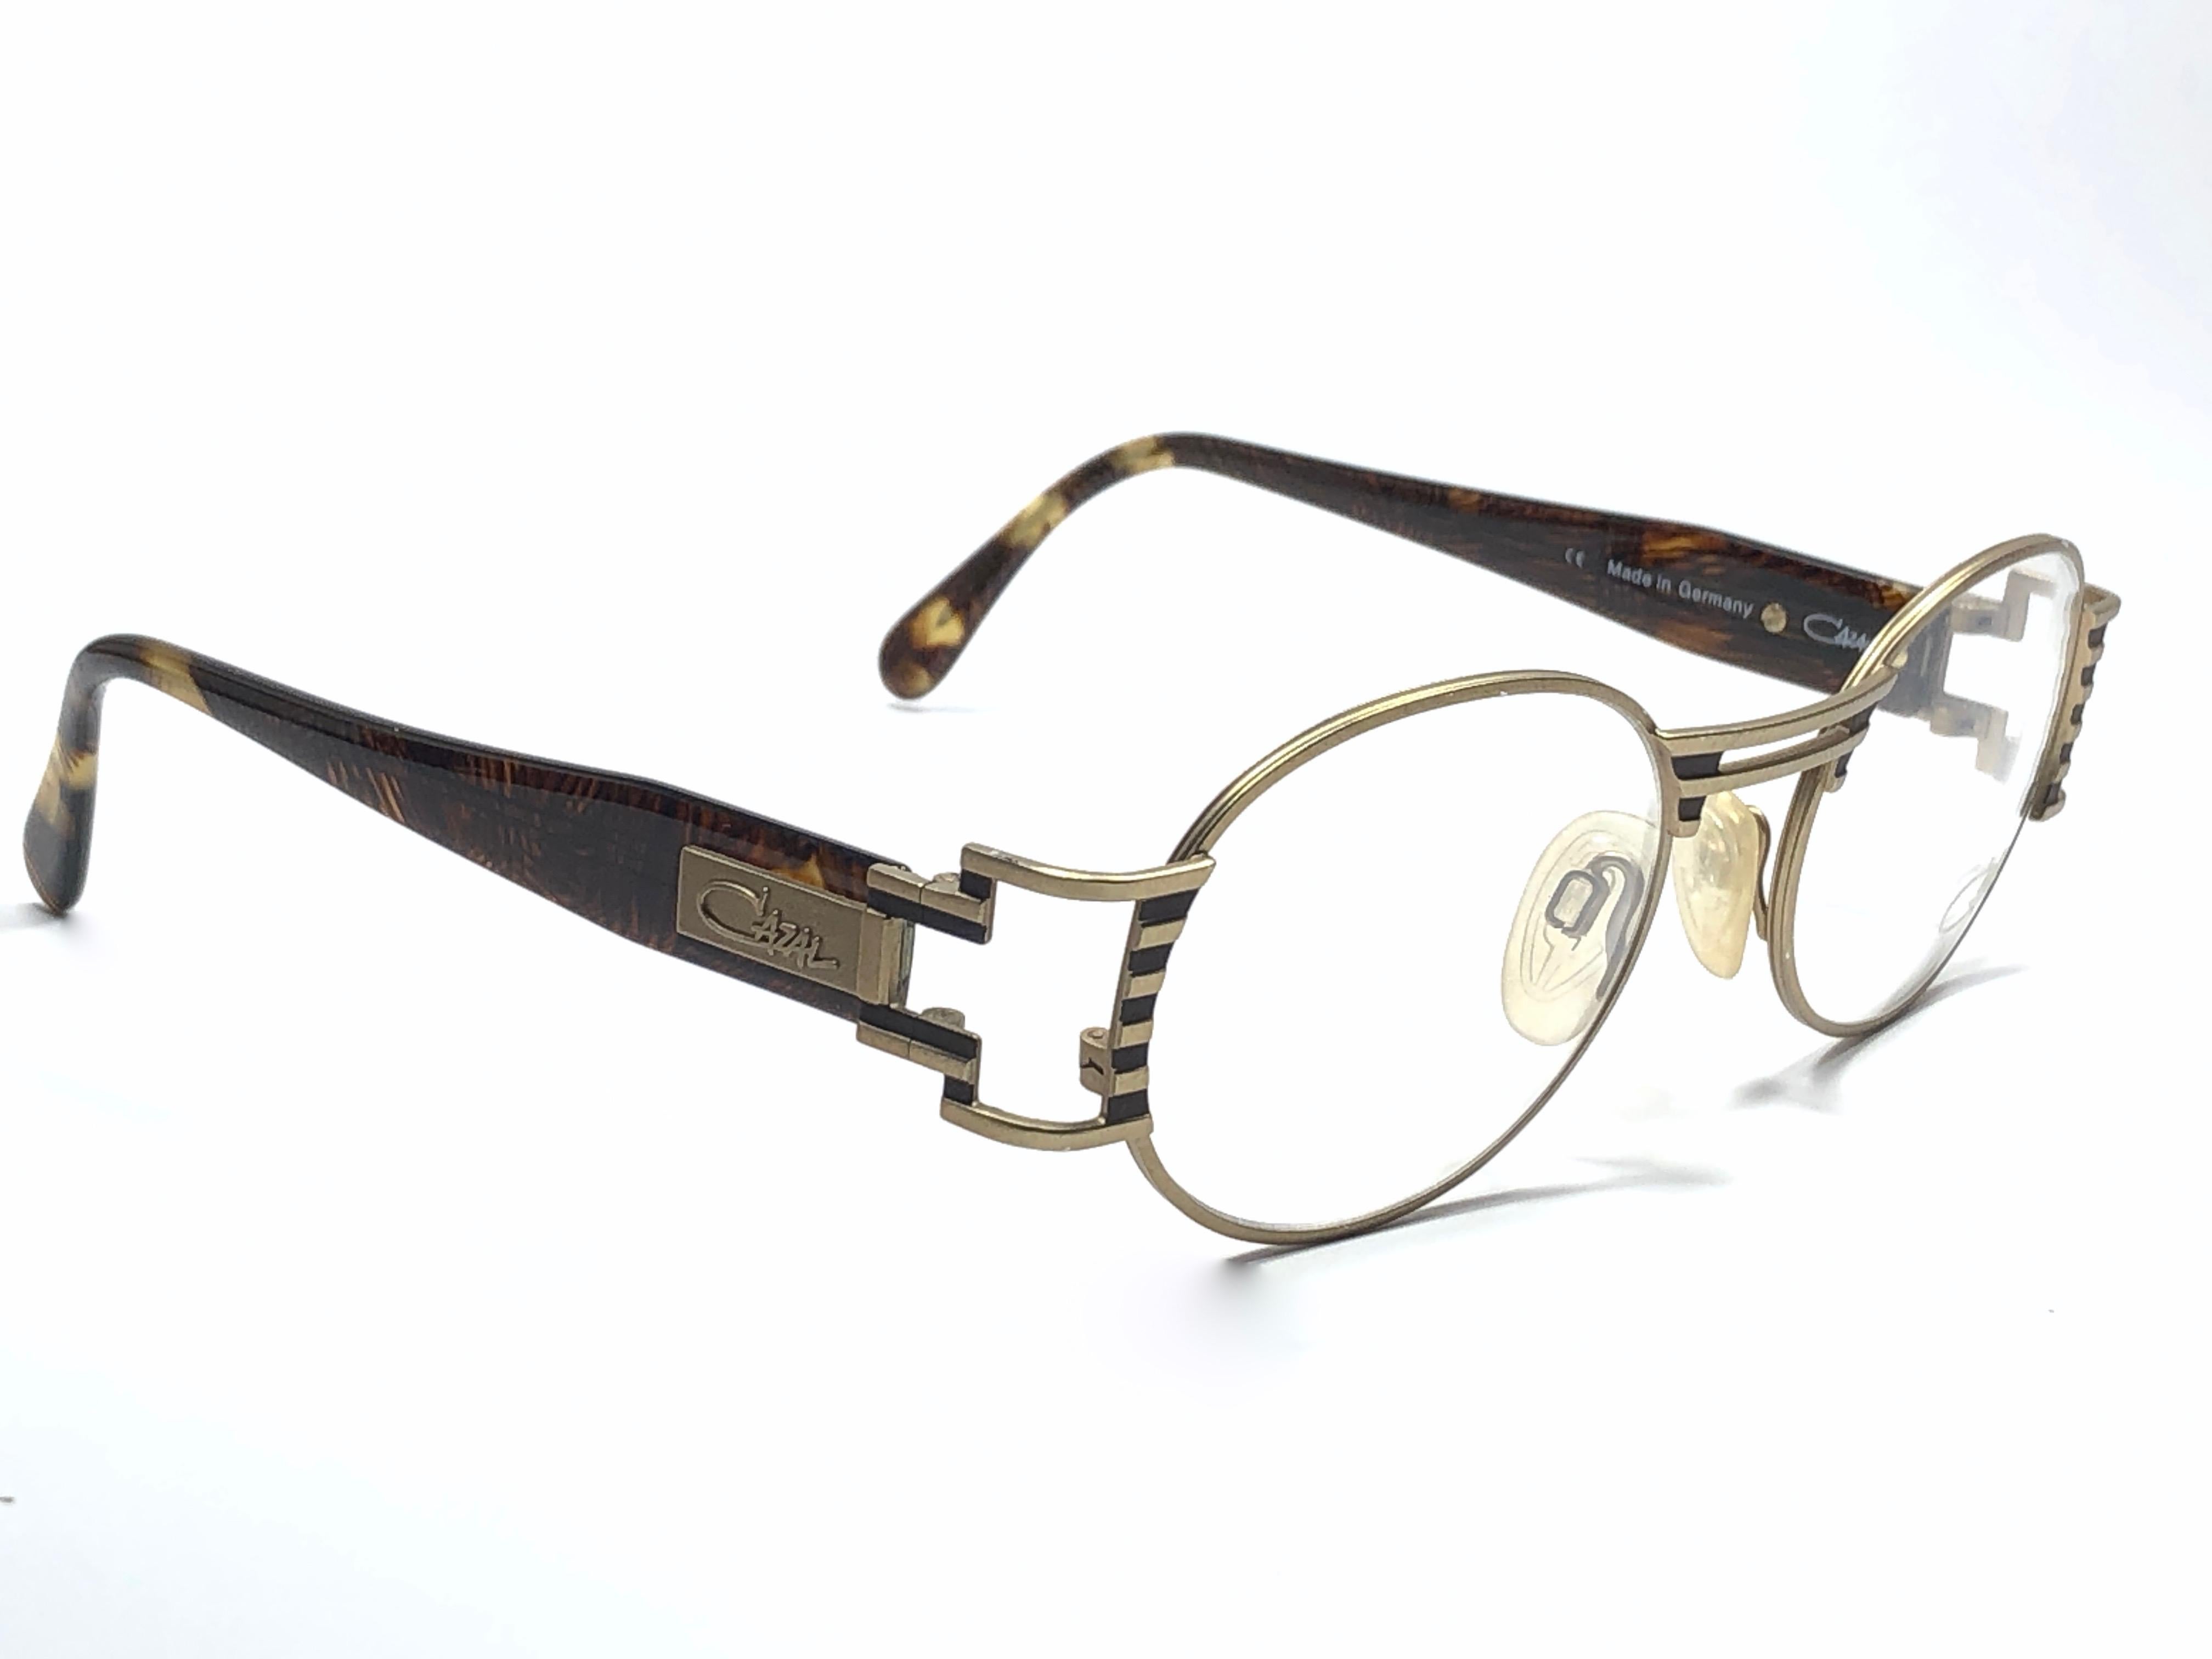 New Vintage Cazal 976 Silver Oval With Black Details Frame. 

Comes With Its Original Cazal Case. This Item May Show Minor Sign Of Wear Due To Storage.

Made In West Germany.

Front : 14 Cms 
Lens Height : 4 Cms 
Lens Width : 5.2 Cms 
Temples : 12